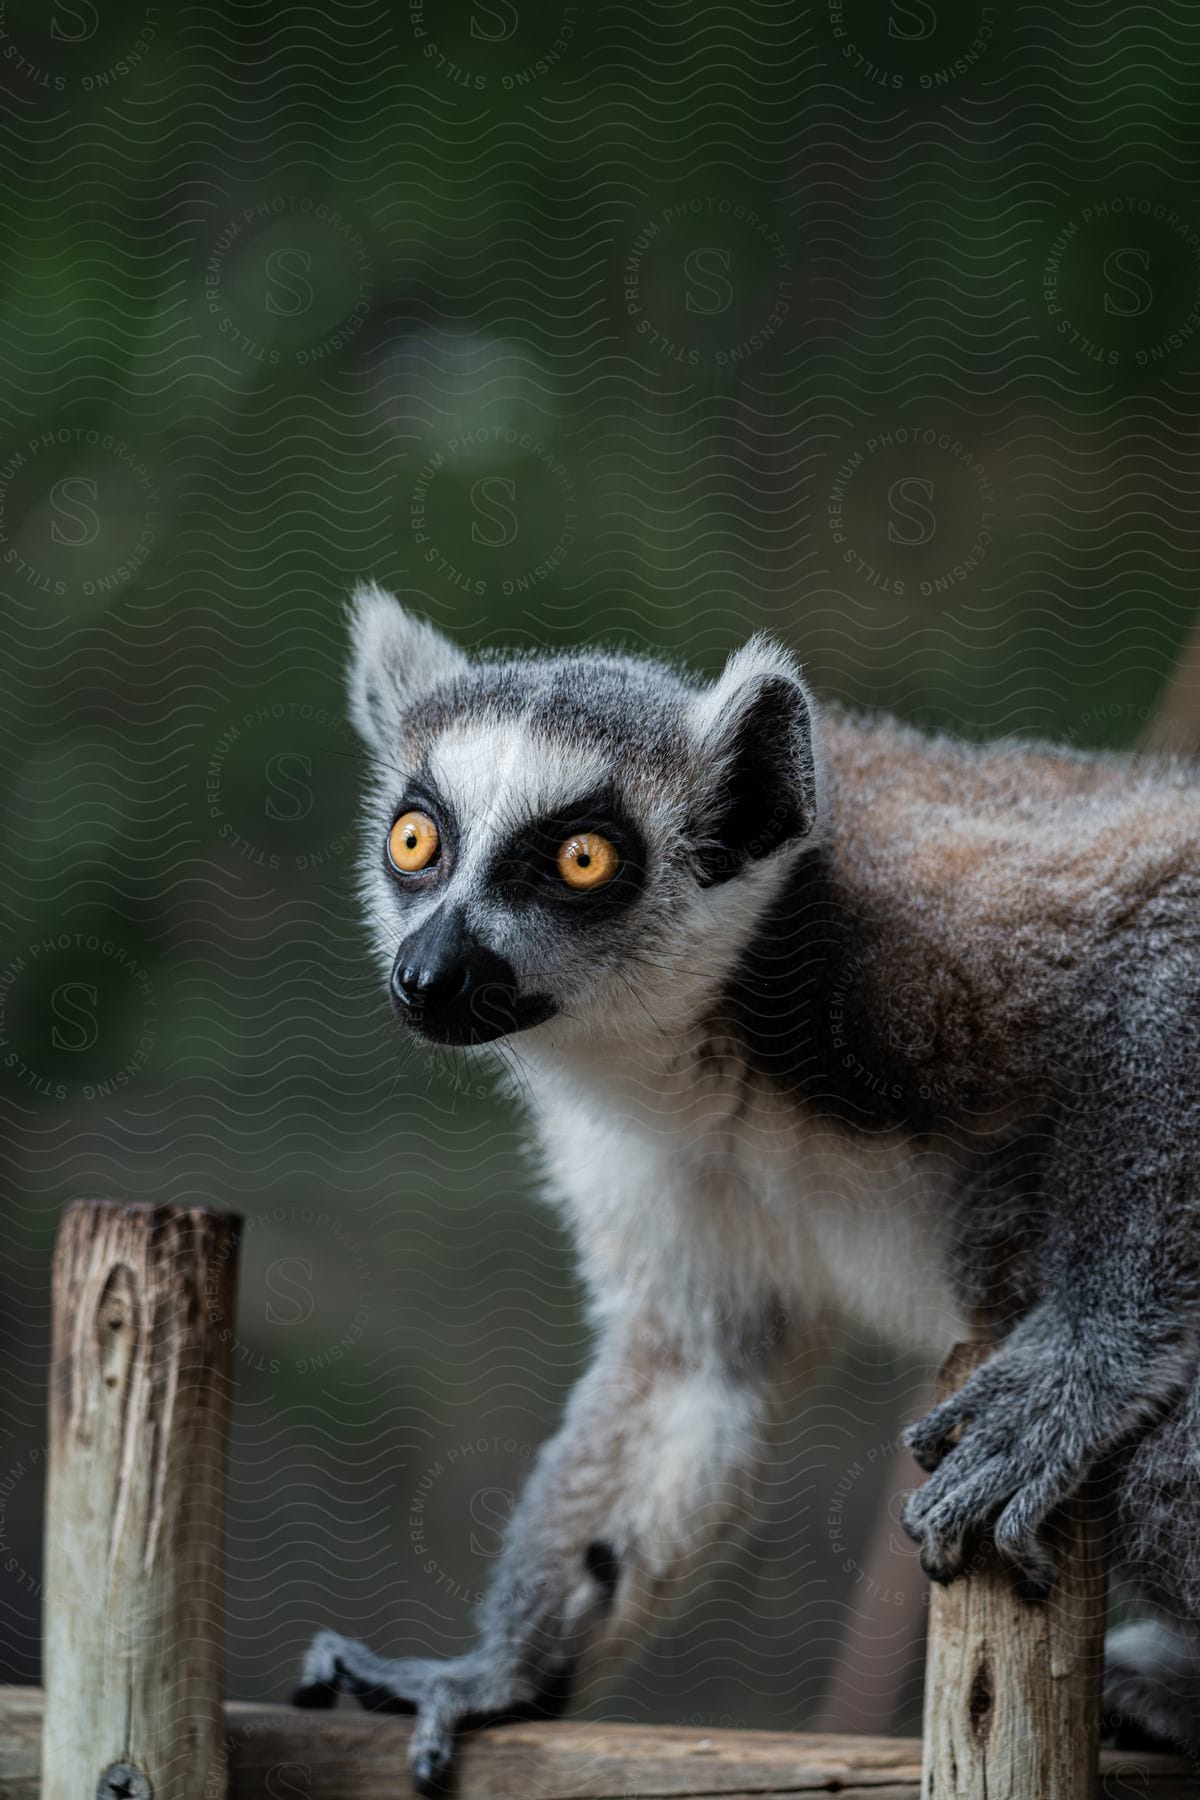 A lemur is staring off to the side with its bright yellow eyes as it holds onto a piece of wood.